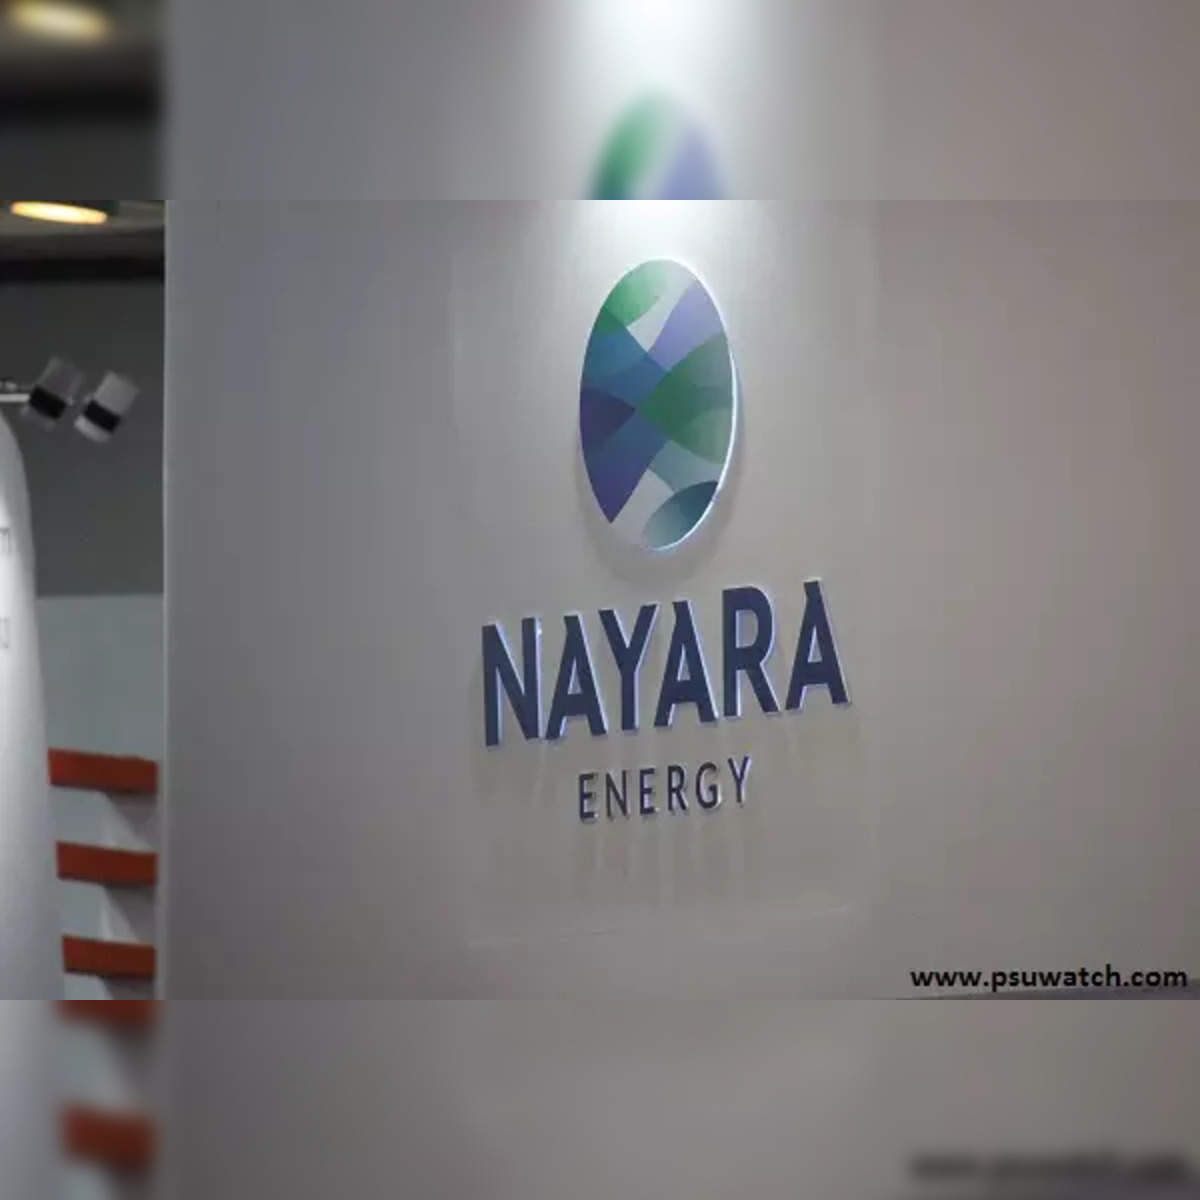 Mgmt: Nayara fuel dealers to meet Mgmt today - The Economic Times